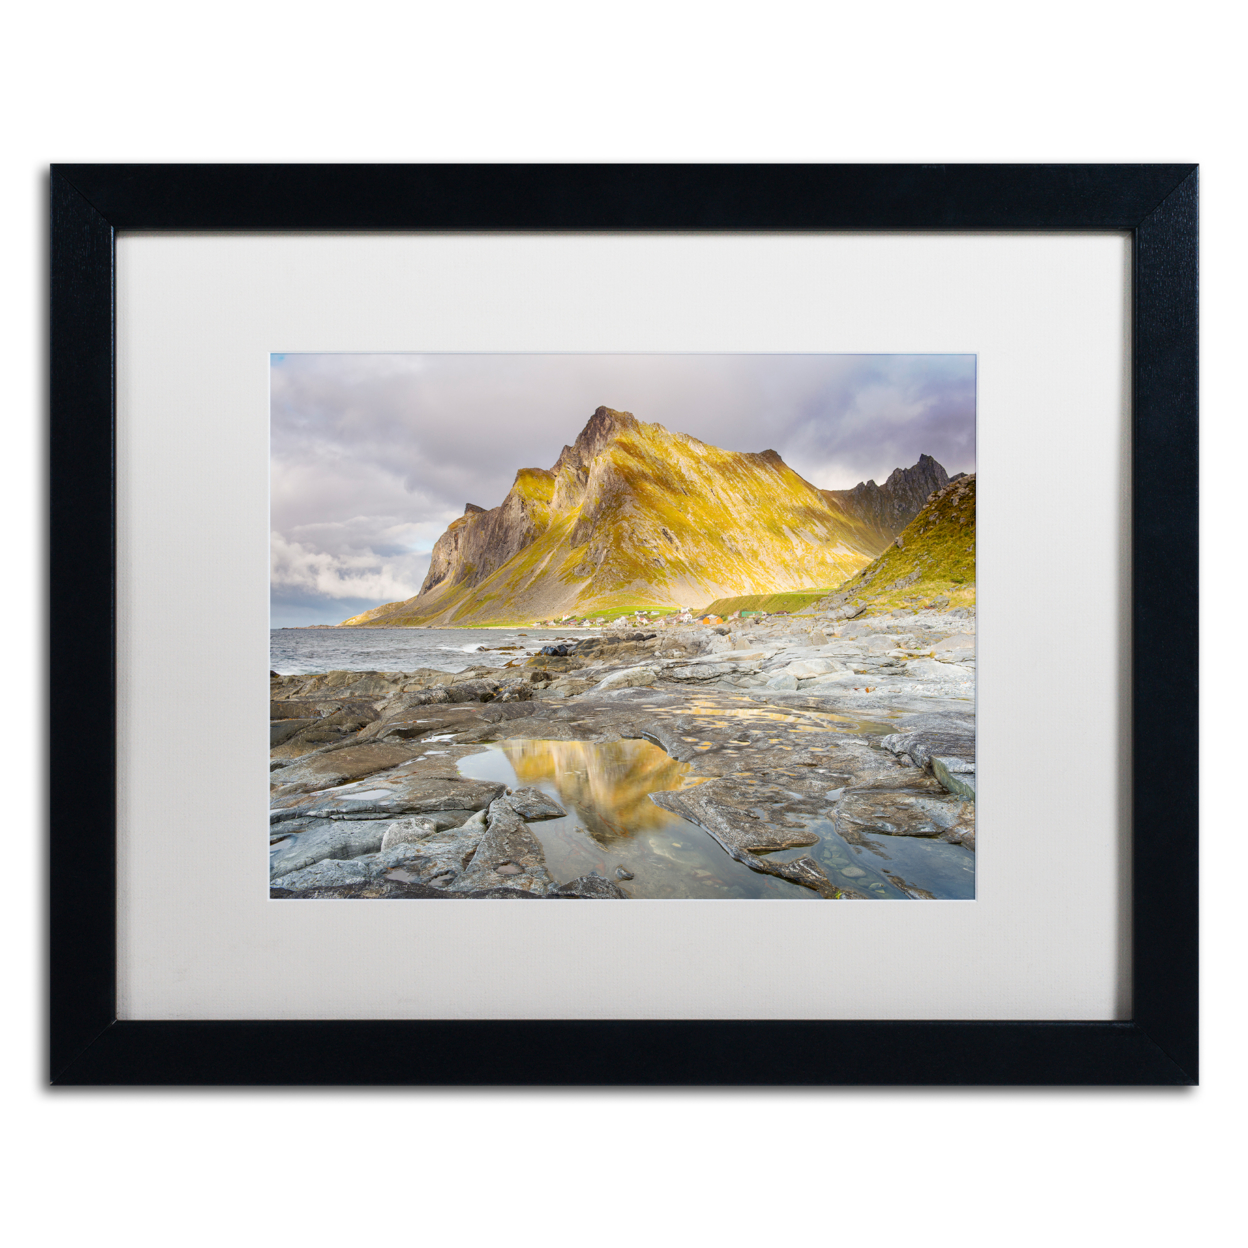 Michael Blanchette Photography 'Under The Mountain' Black Wooden Framed Art 18 X 22 Inches